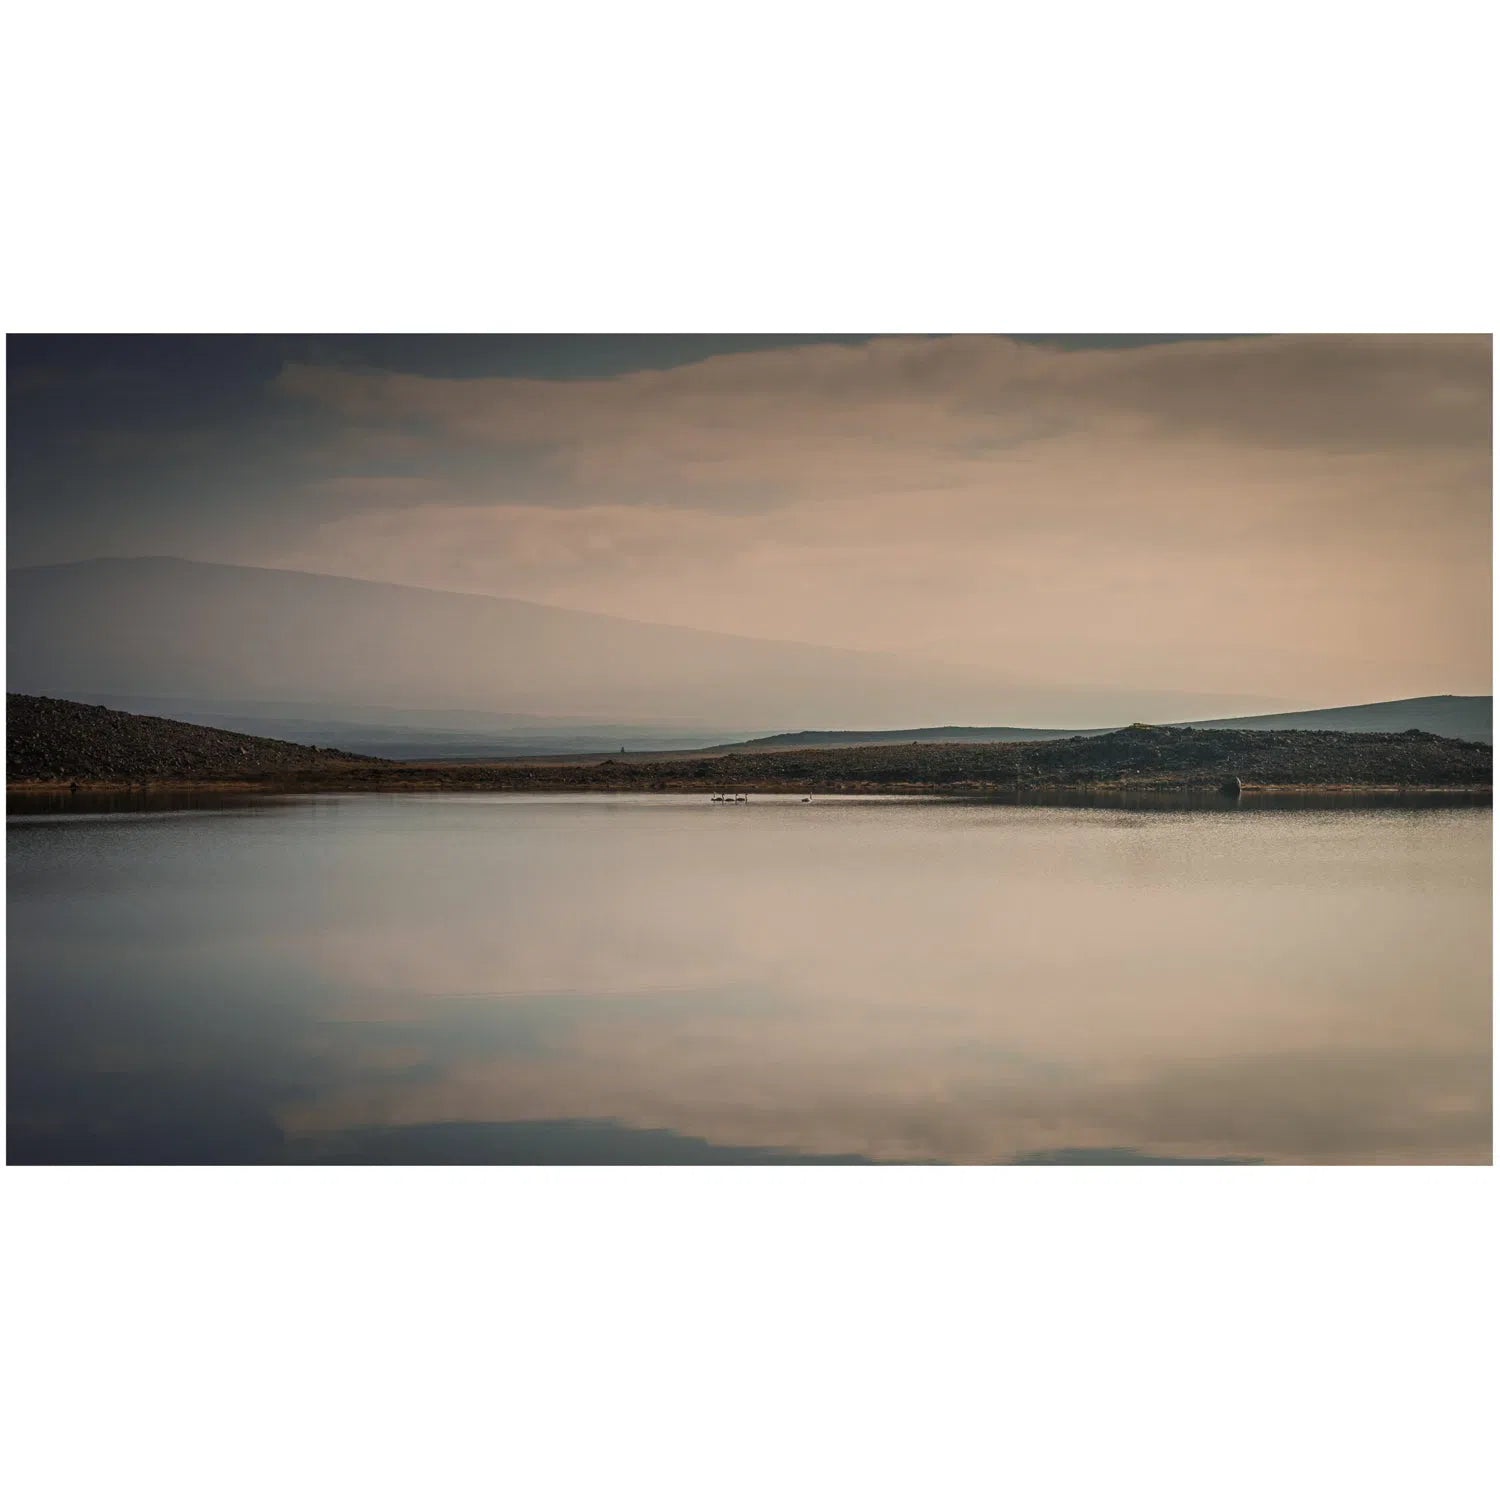 Quiet lake in Iceland-Imagesdartistes